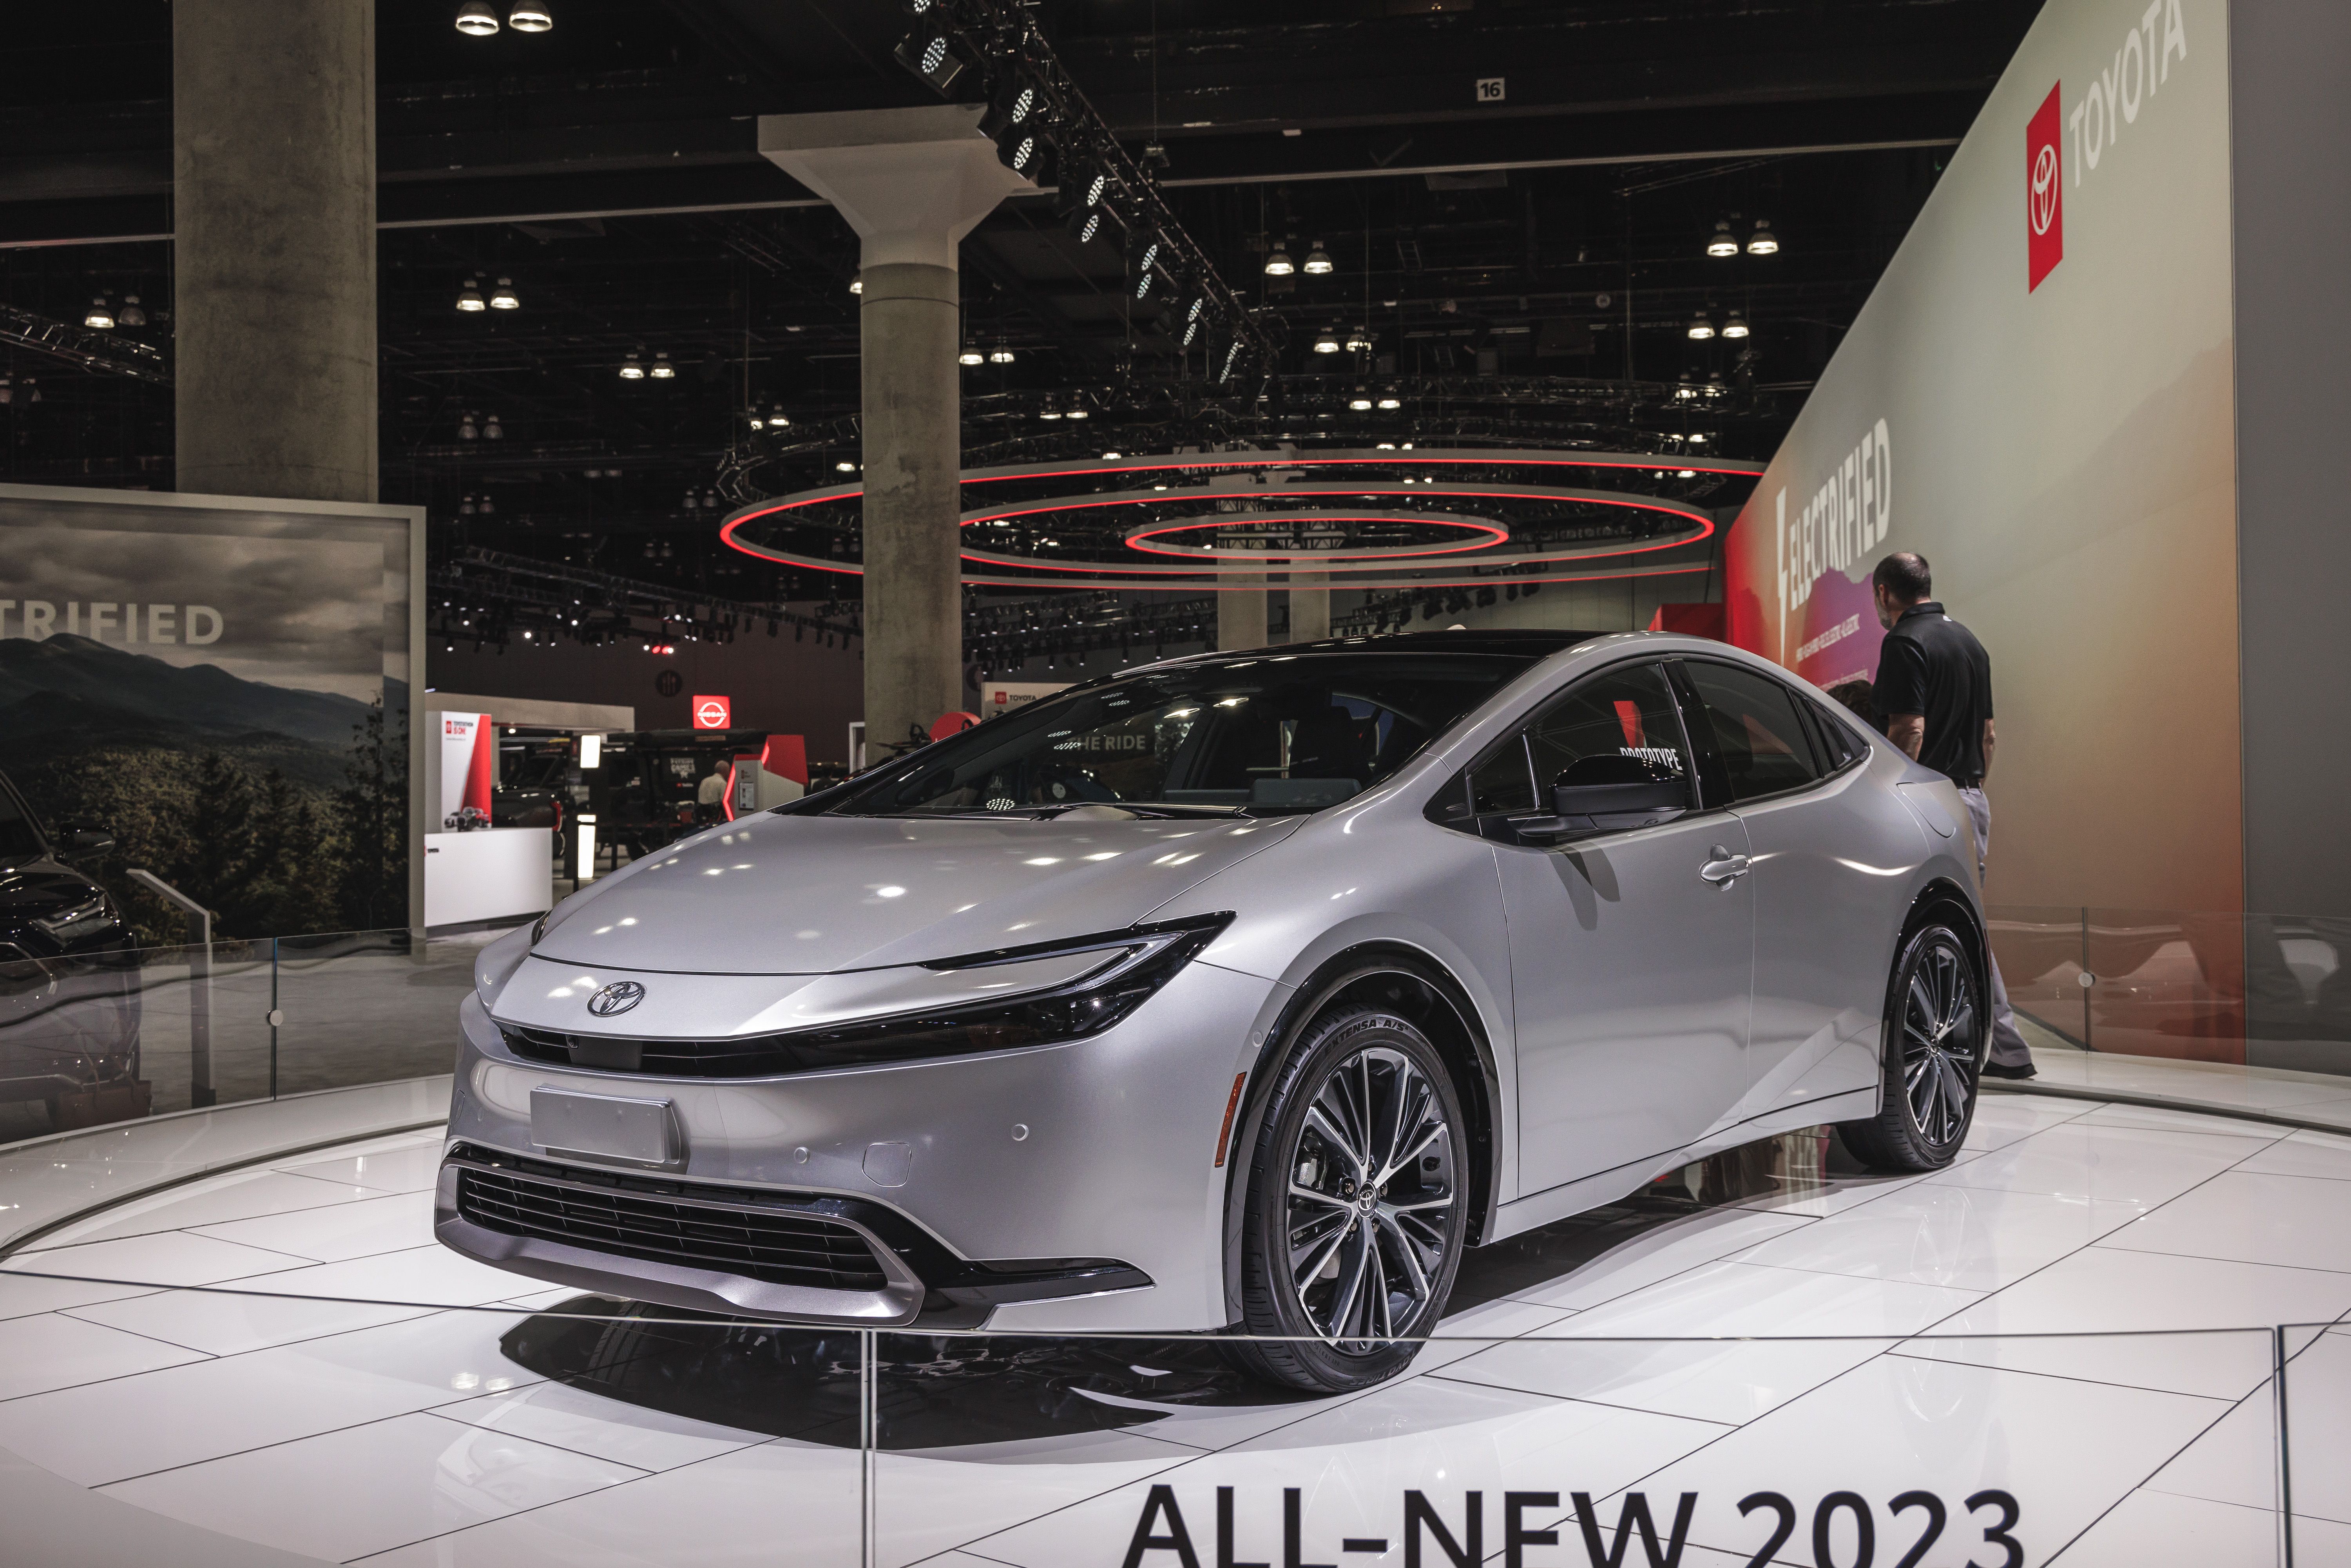 2023 Toyota Prius Photo: See the New Hybrid from Every Angle